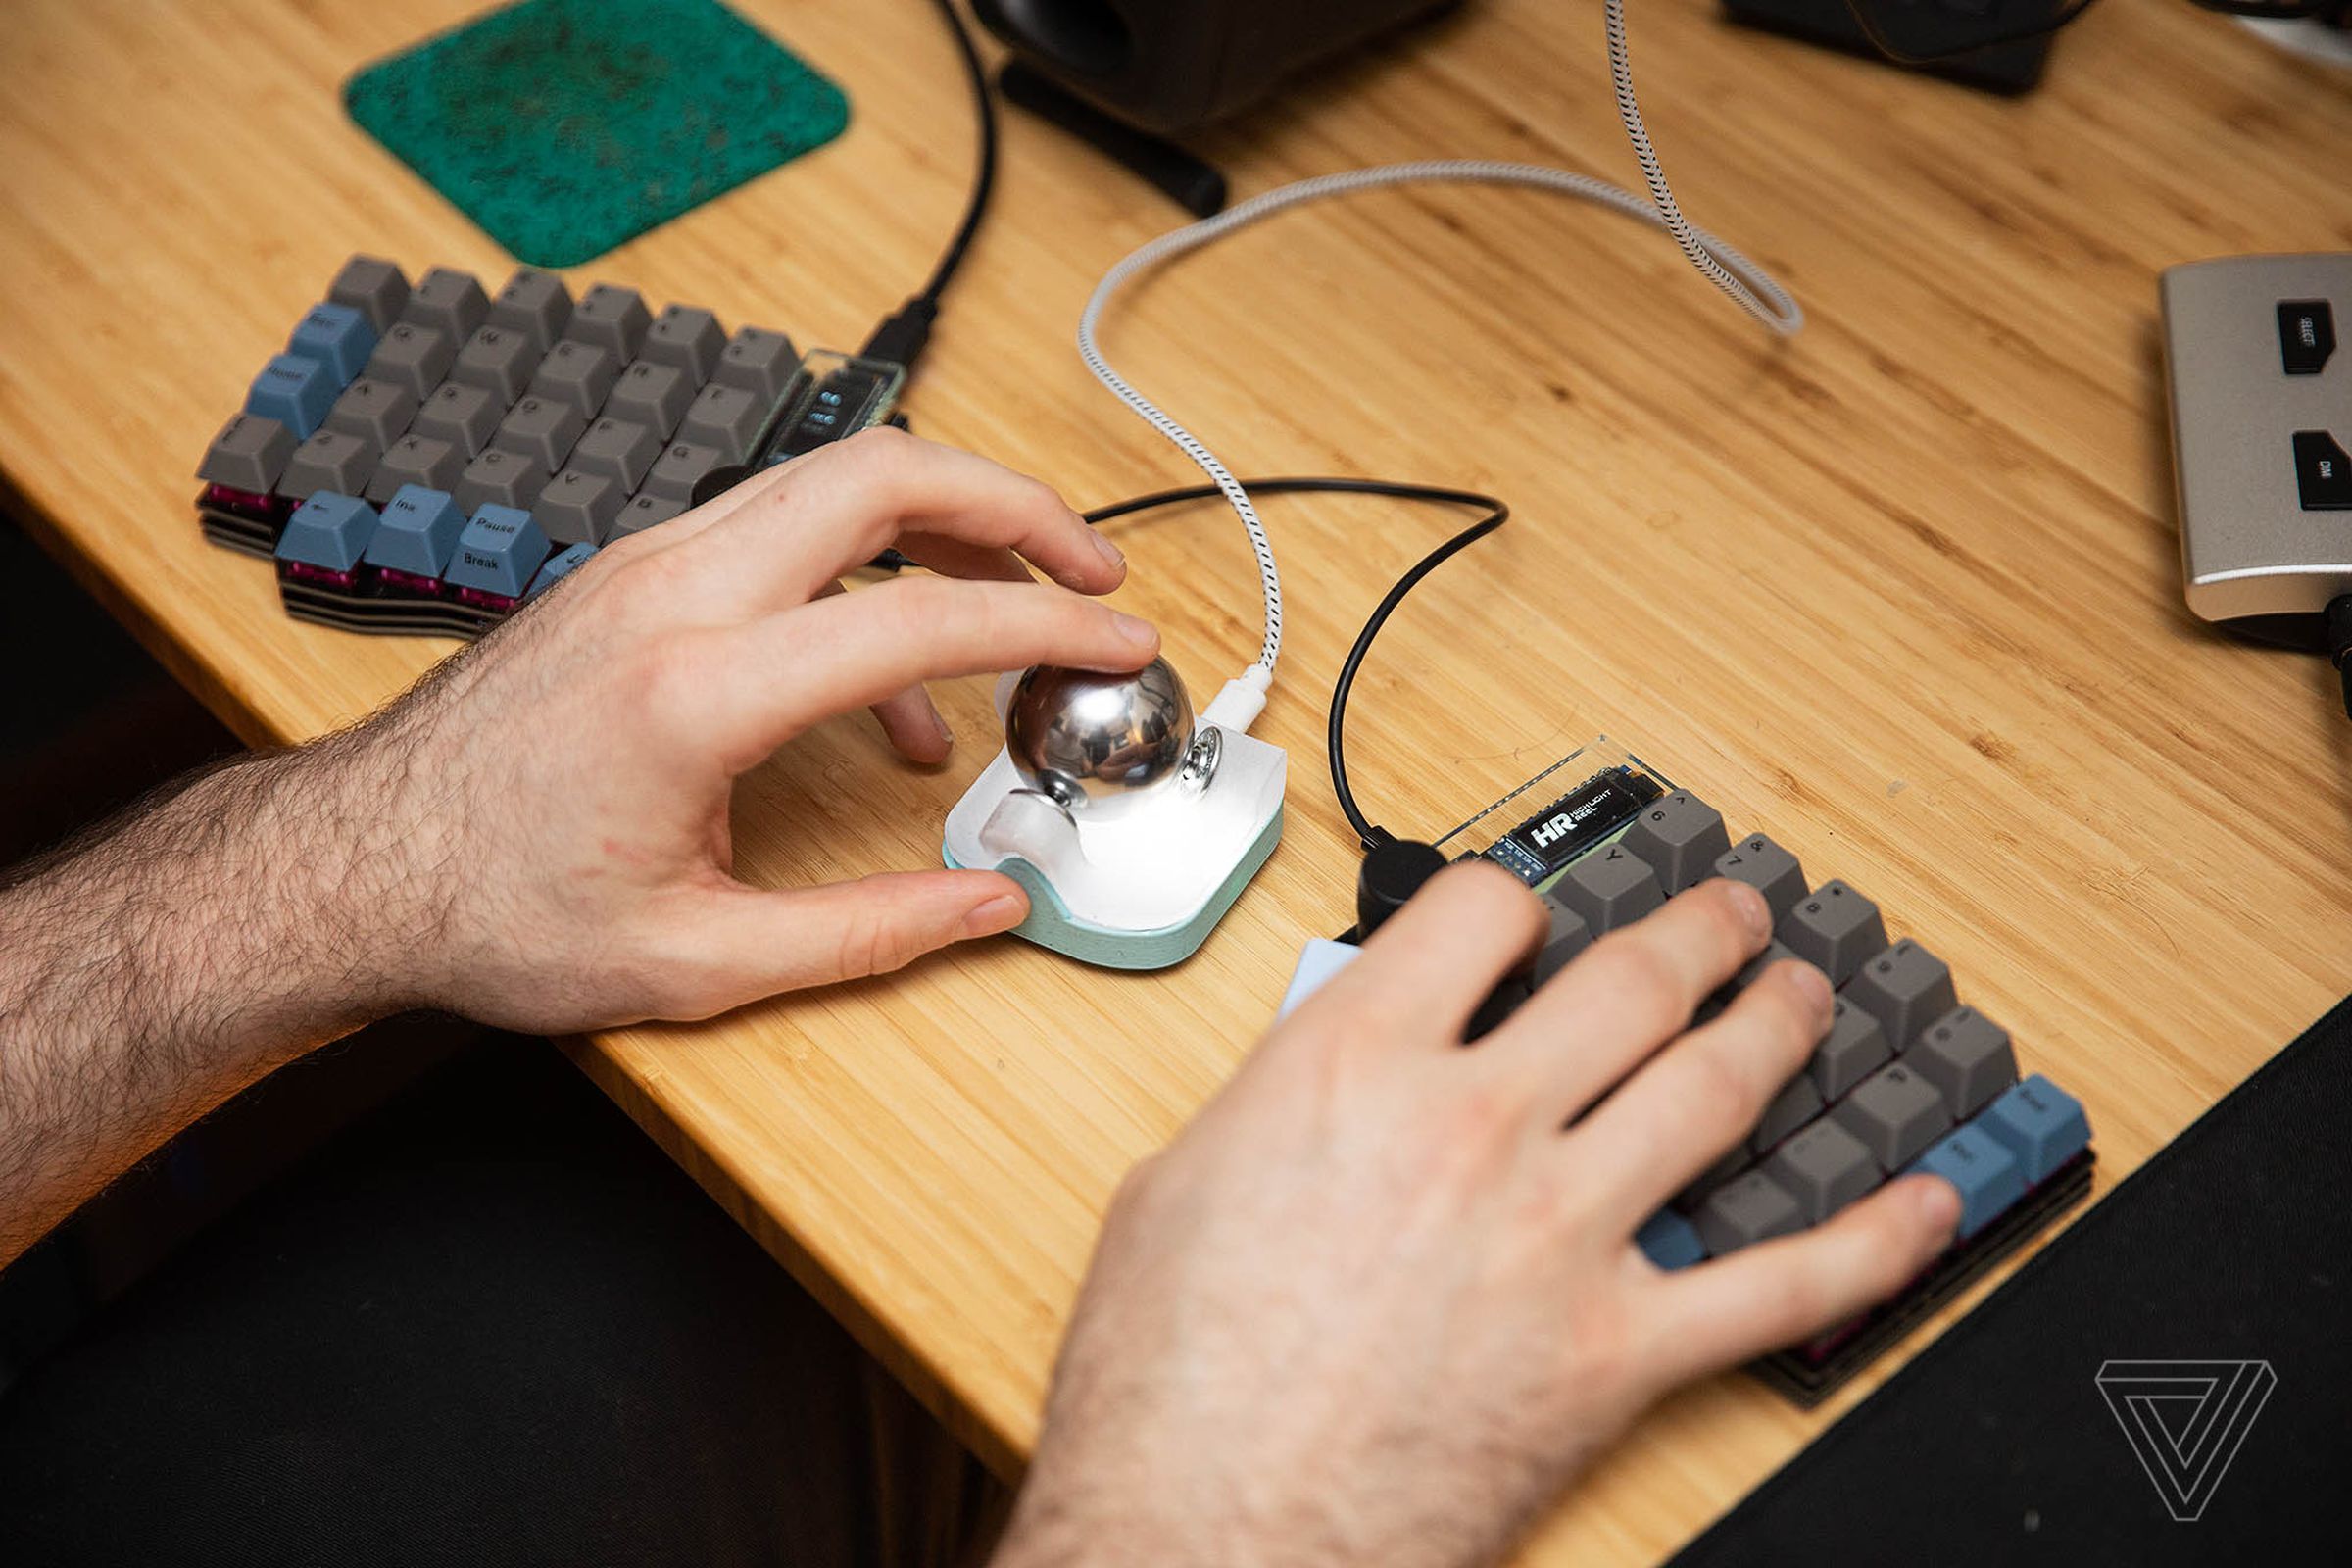 A man using a split keyboard with a trackball between the two halves. It features a large, shiny metal ball bearing.